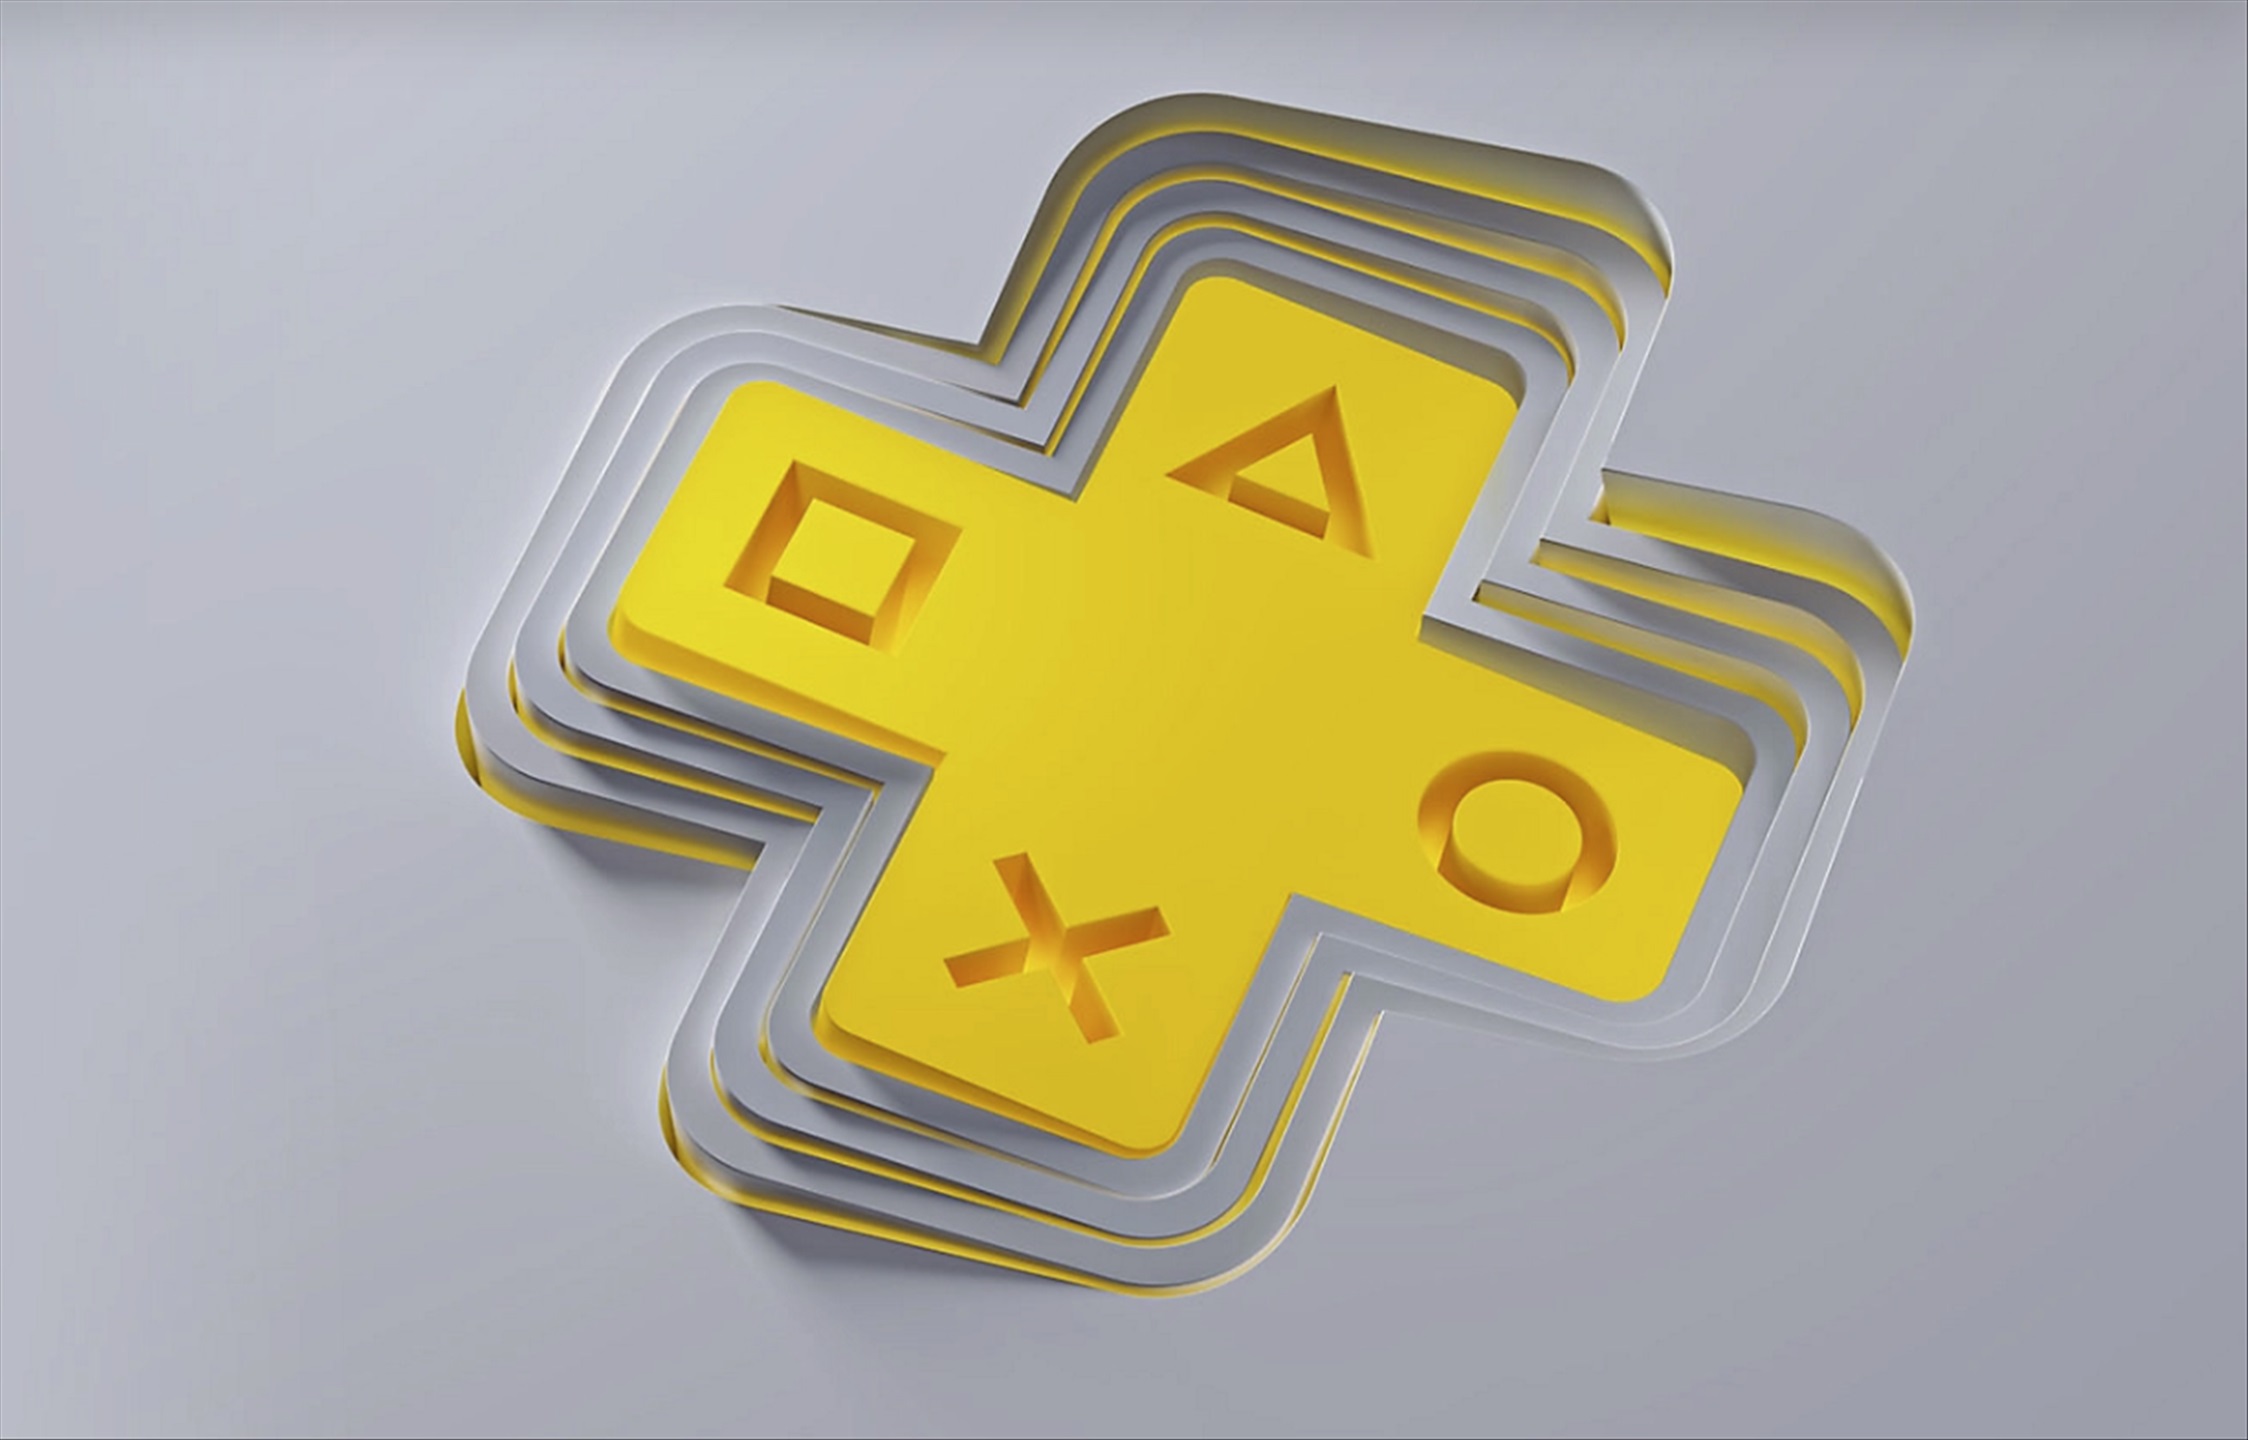 The all new PlayStation Plus is now launched in Australia!